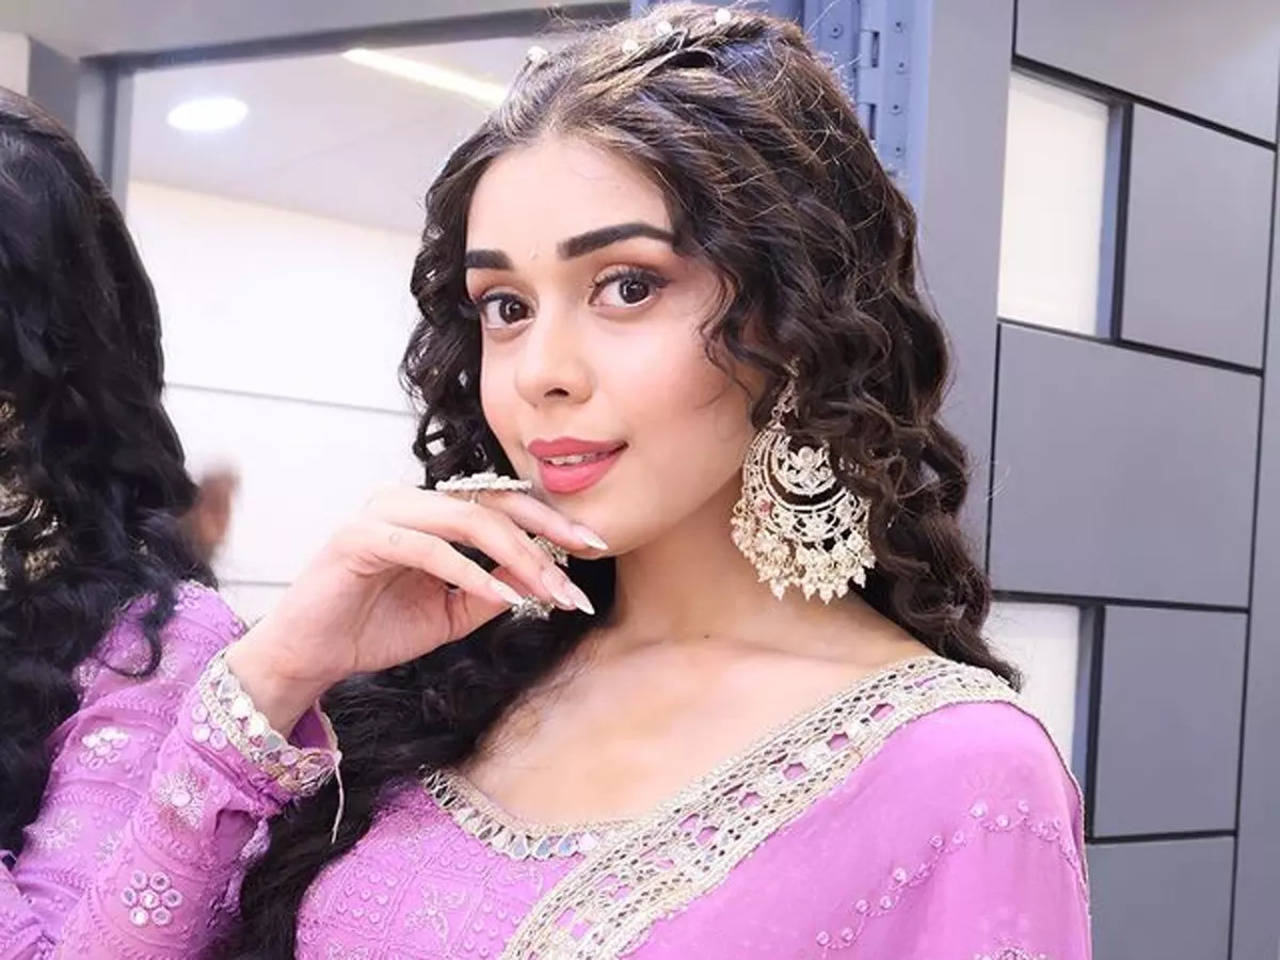 Exclusive - Bekaaboo actress Eisha Singh reveals her dream role, says "I  would want to play an escort on screen" - Times of India